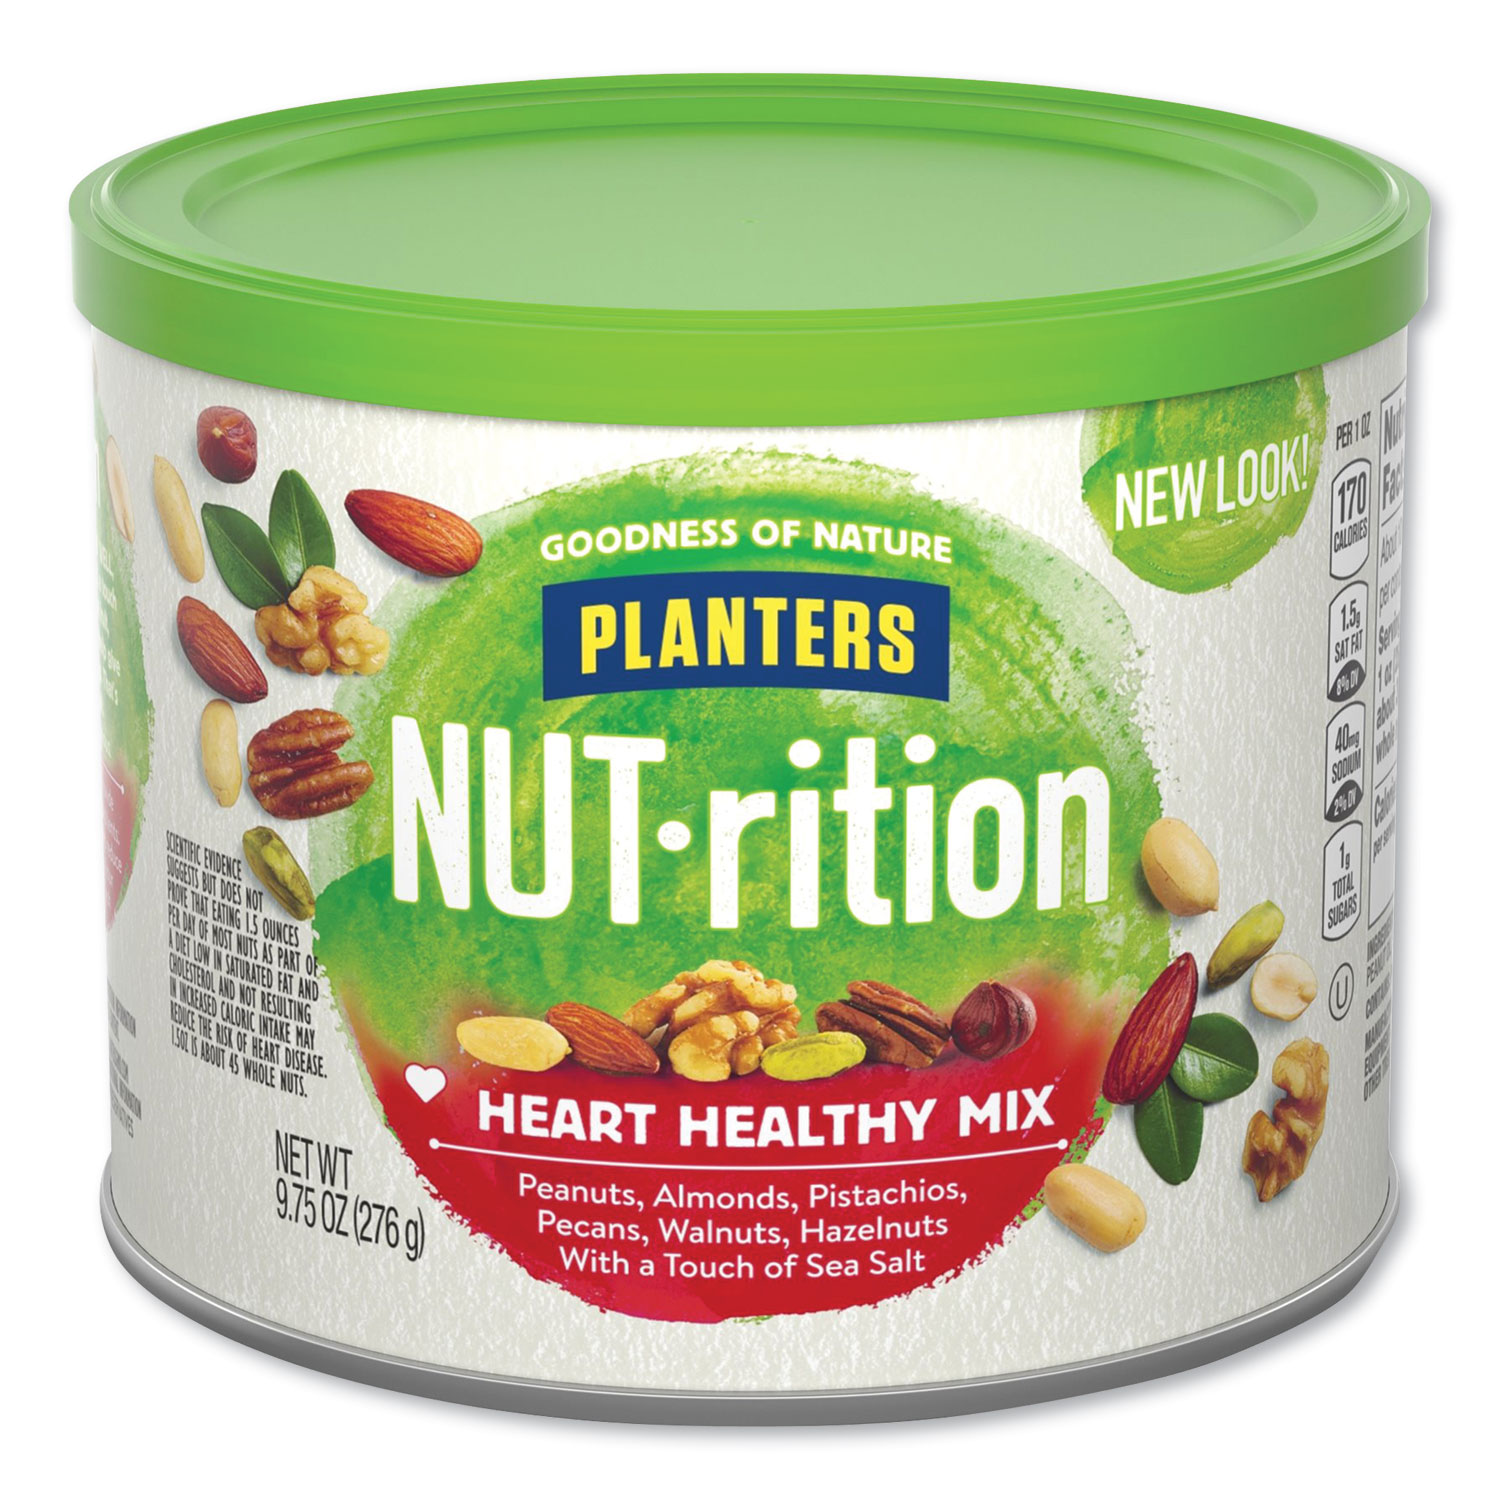 Planters® NUT-rition Heart Healthy Mix, 9.75 oz Can